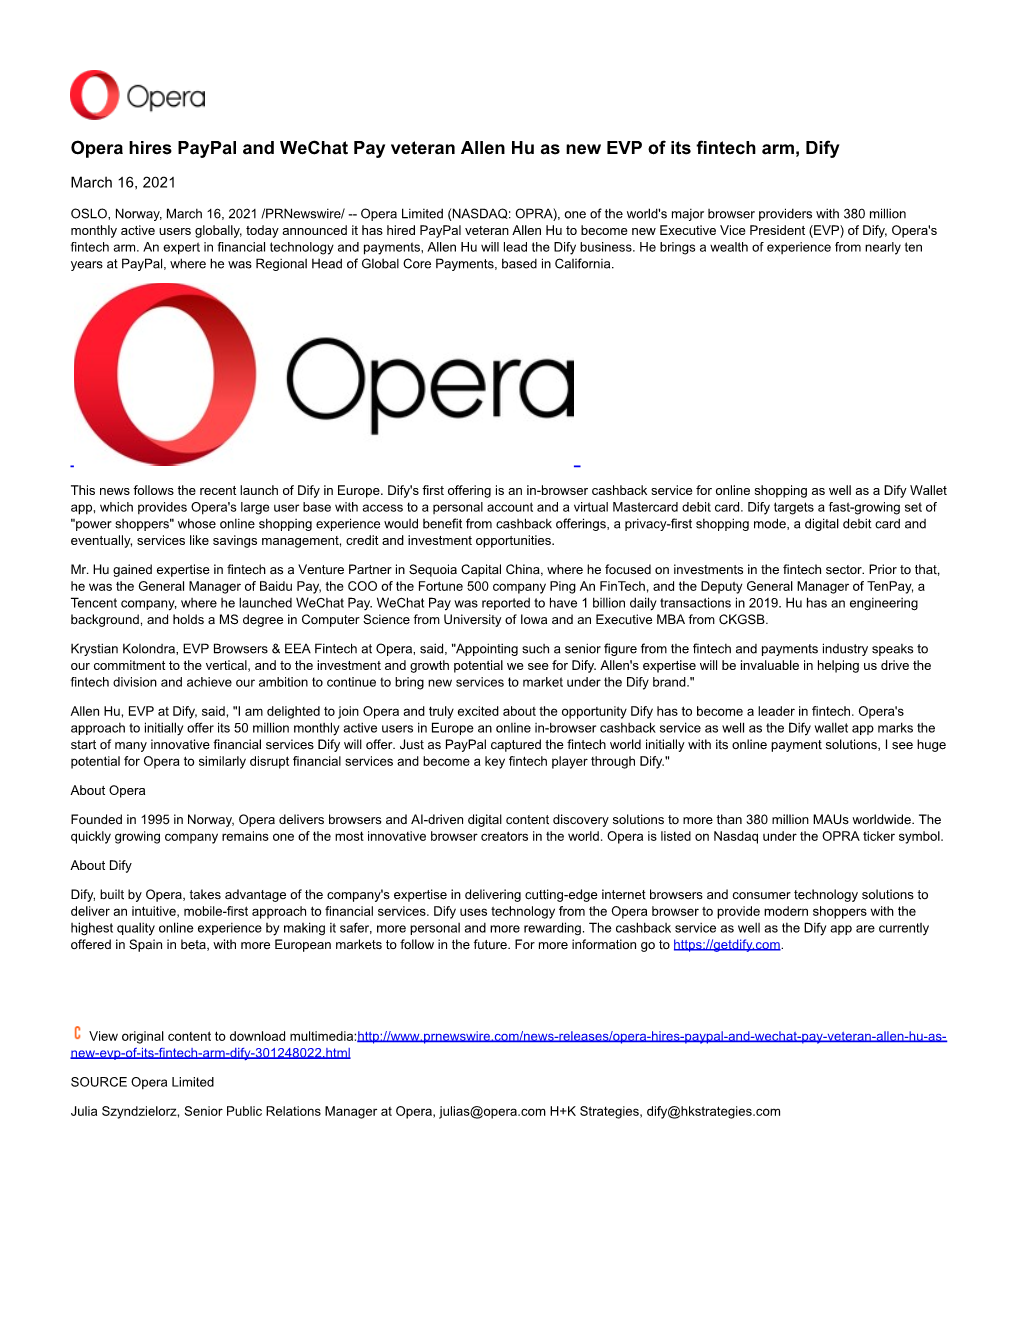 Opera Hires Paypal and Wechat Pay Veteran Allen Hu As New EVP of Its Fintech Arm, Dify